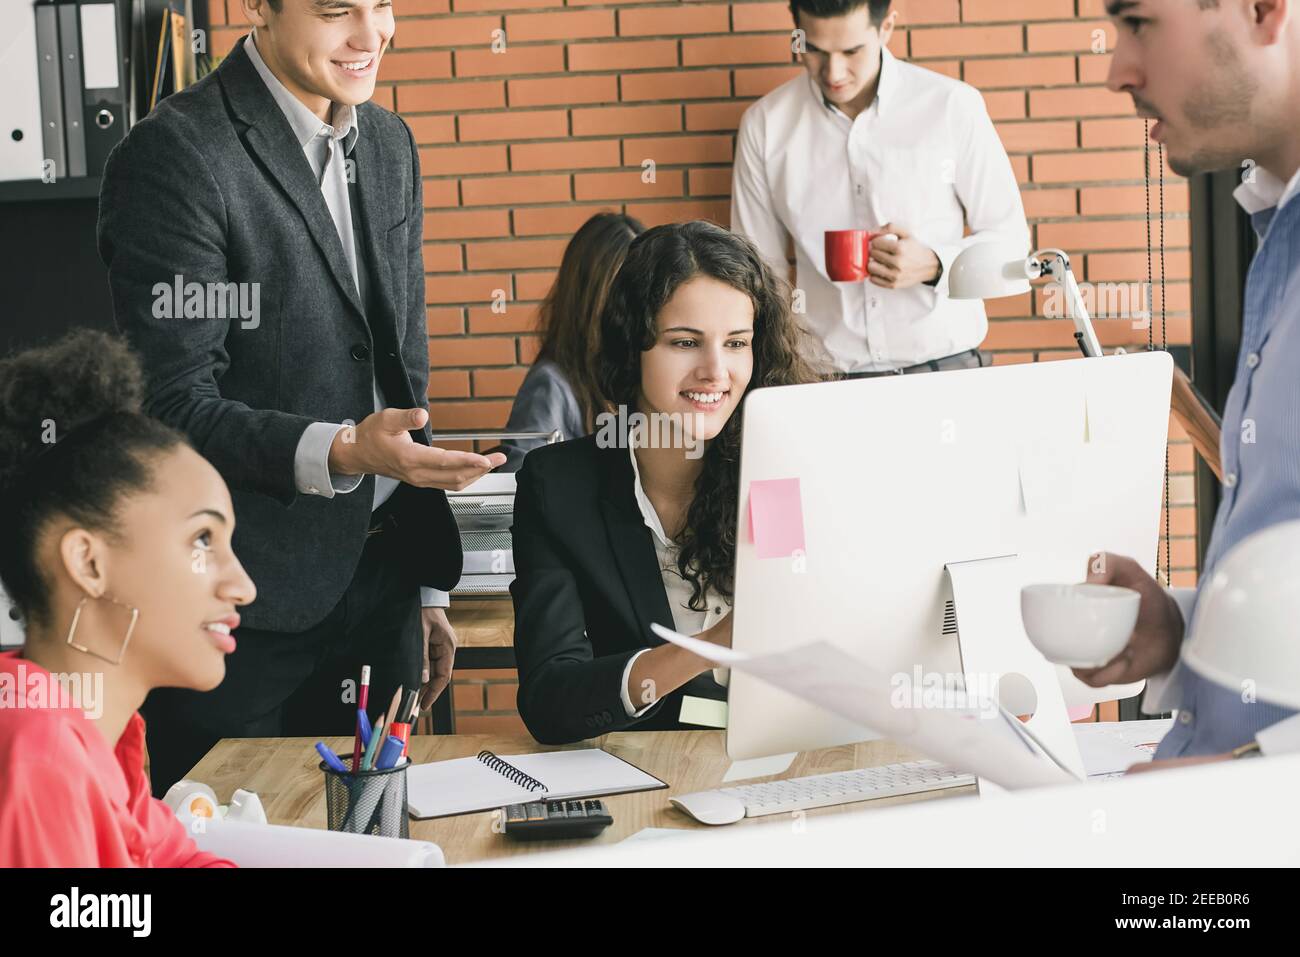 Young multiethnic group of business people working in shared office space Stock Photo